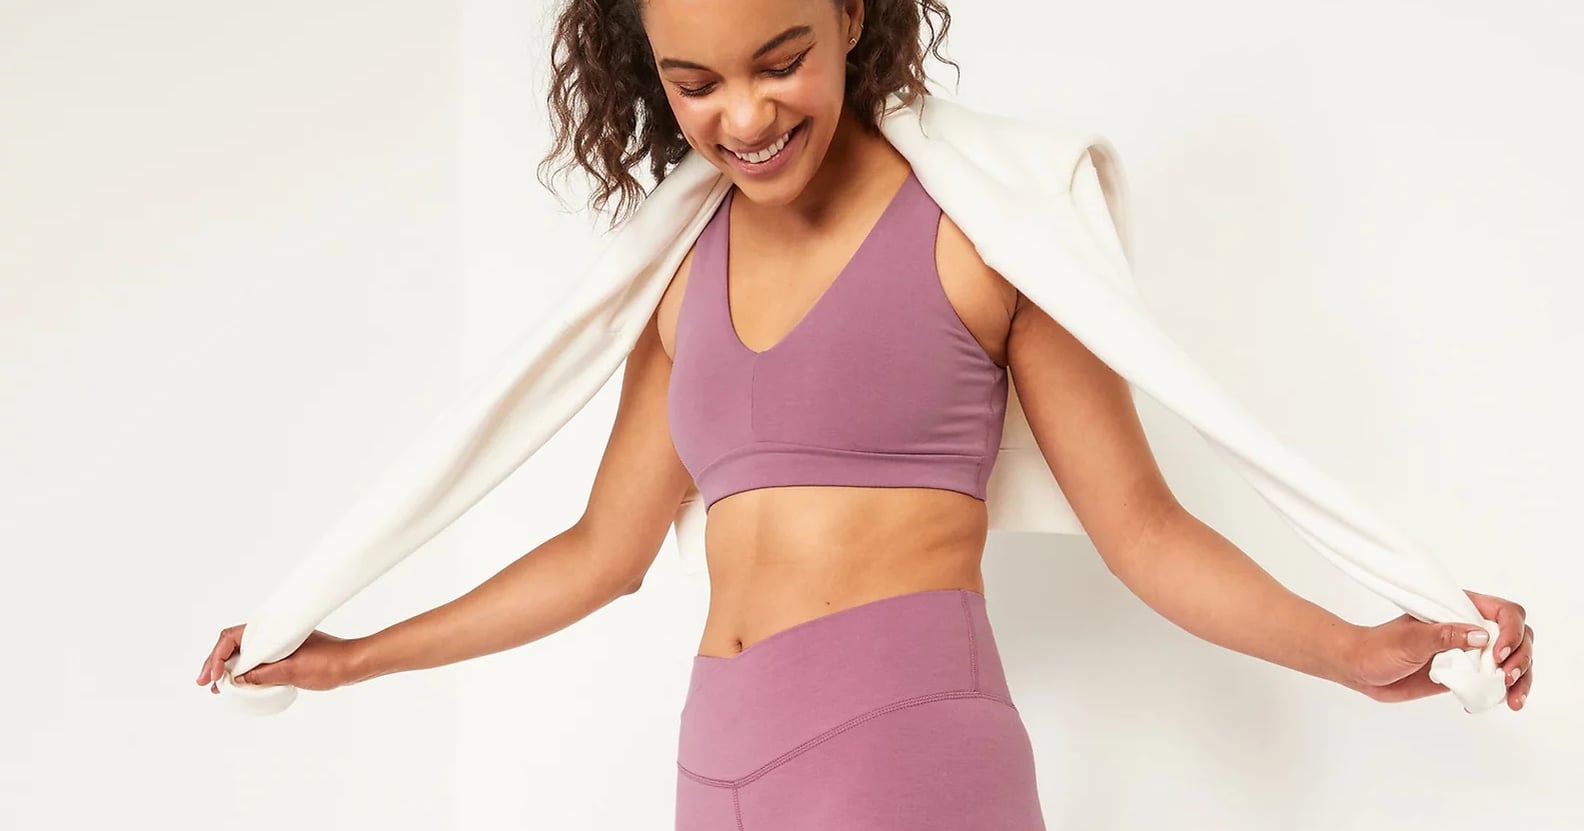 41 Workout Clothes So Cute You'll Want To Go To The Gym